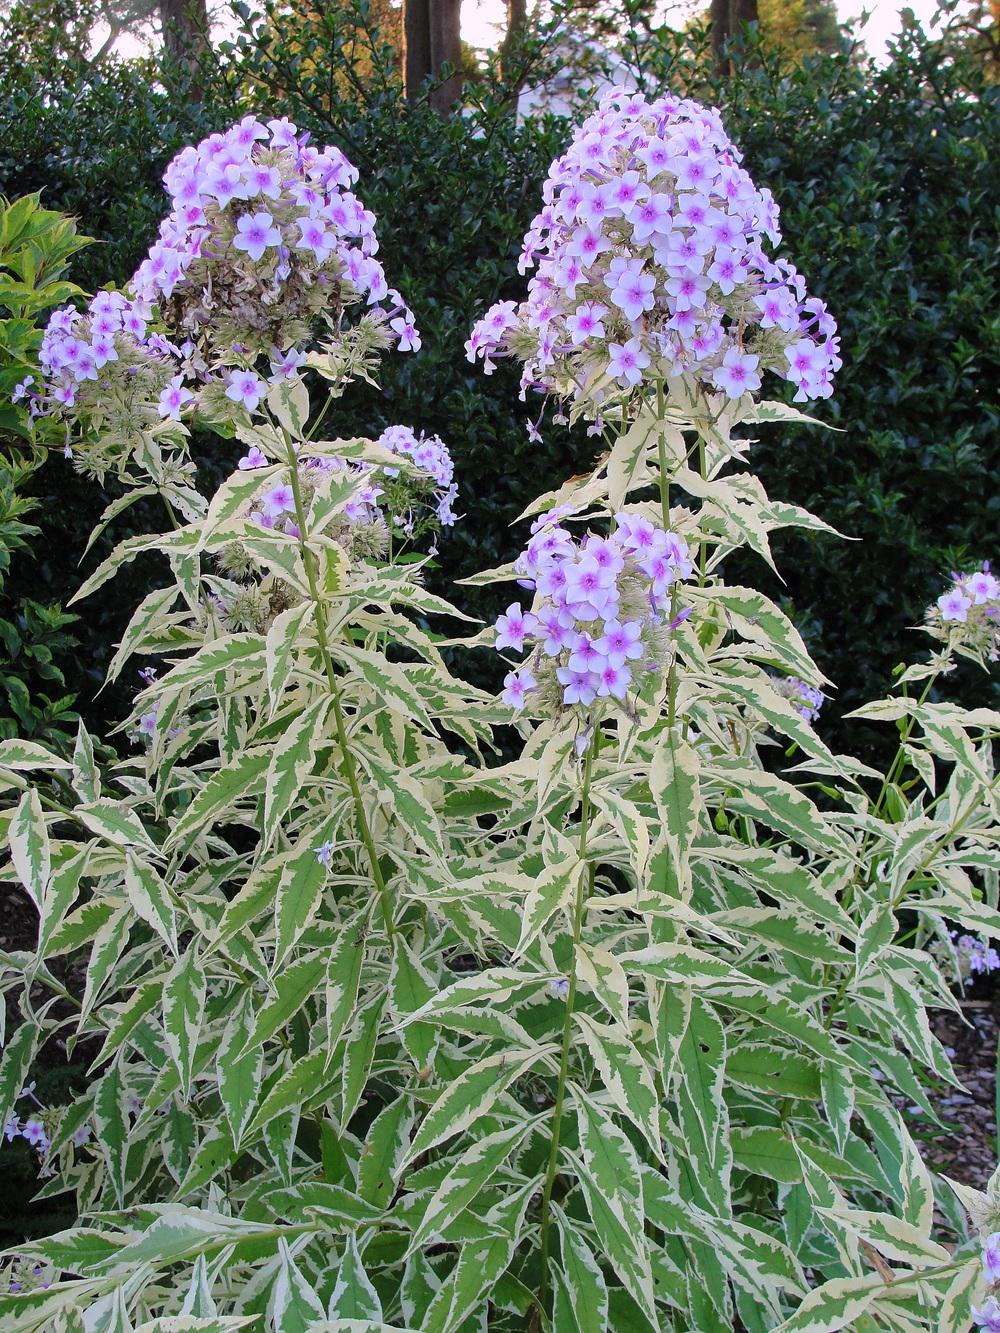 Photo of Variegated Garden Phlox (Phlox paniculata 'Frosted Elegance') uploaded by keithp2012